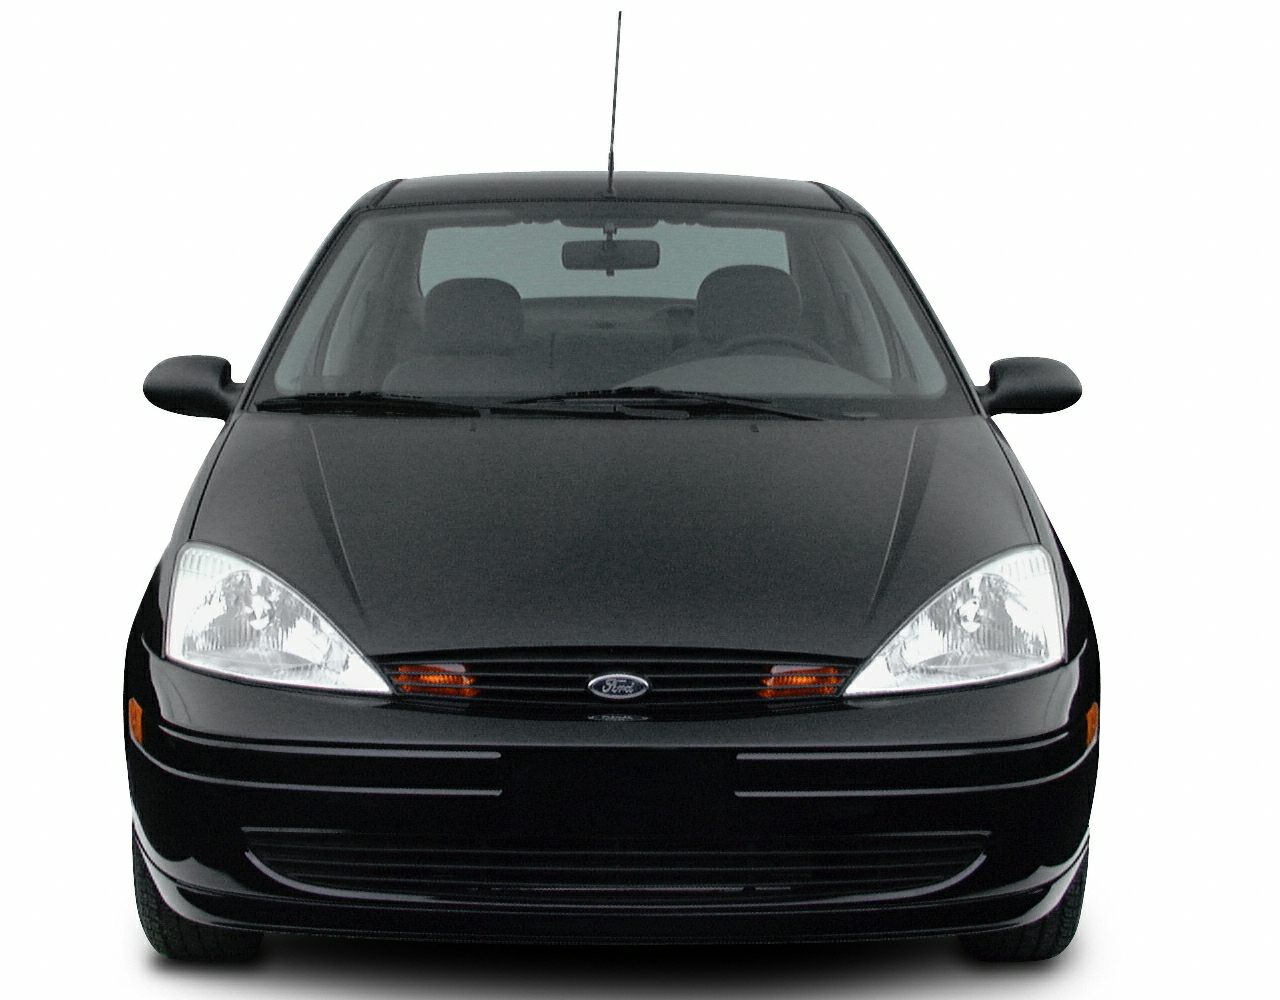 2001 Ford focus zts reliability #1